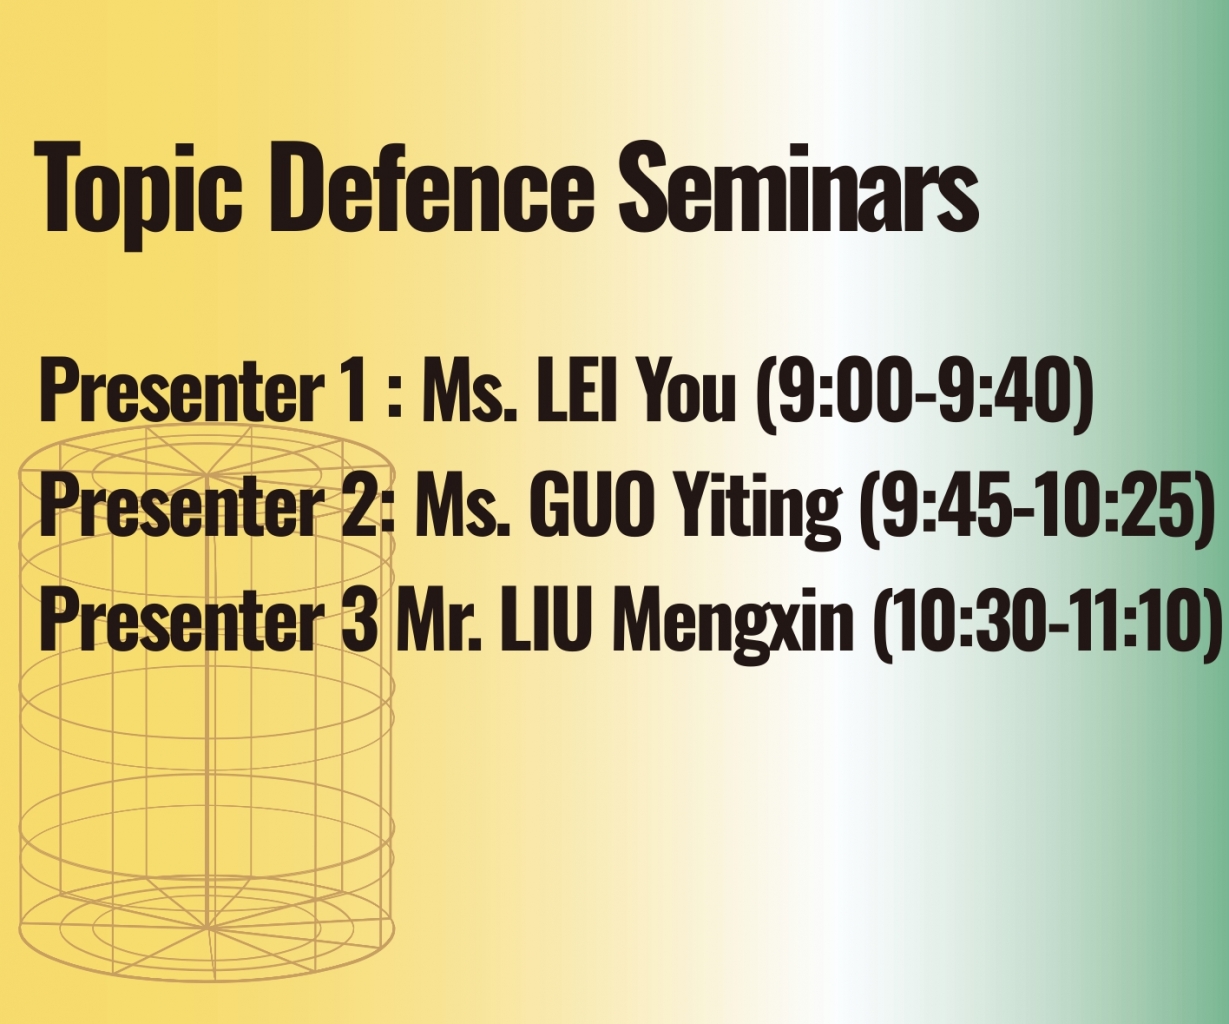 Topic-Defence-seminars-by-Ms-LEI-You-Ms-GUO-Yiting-and-Mr-LI